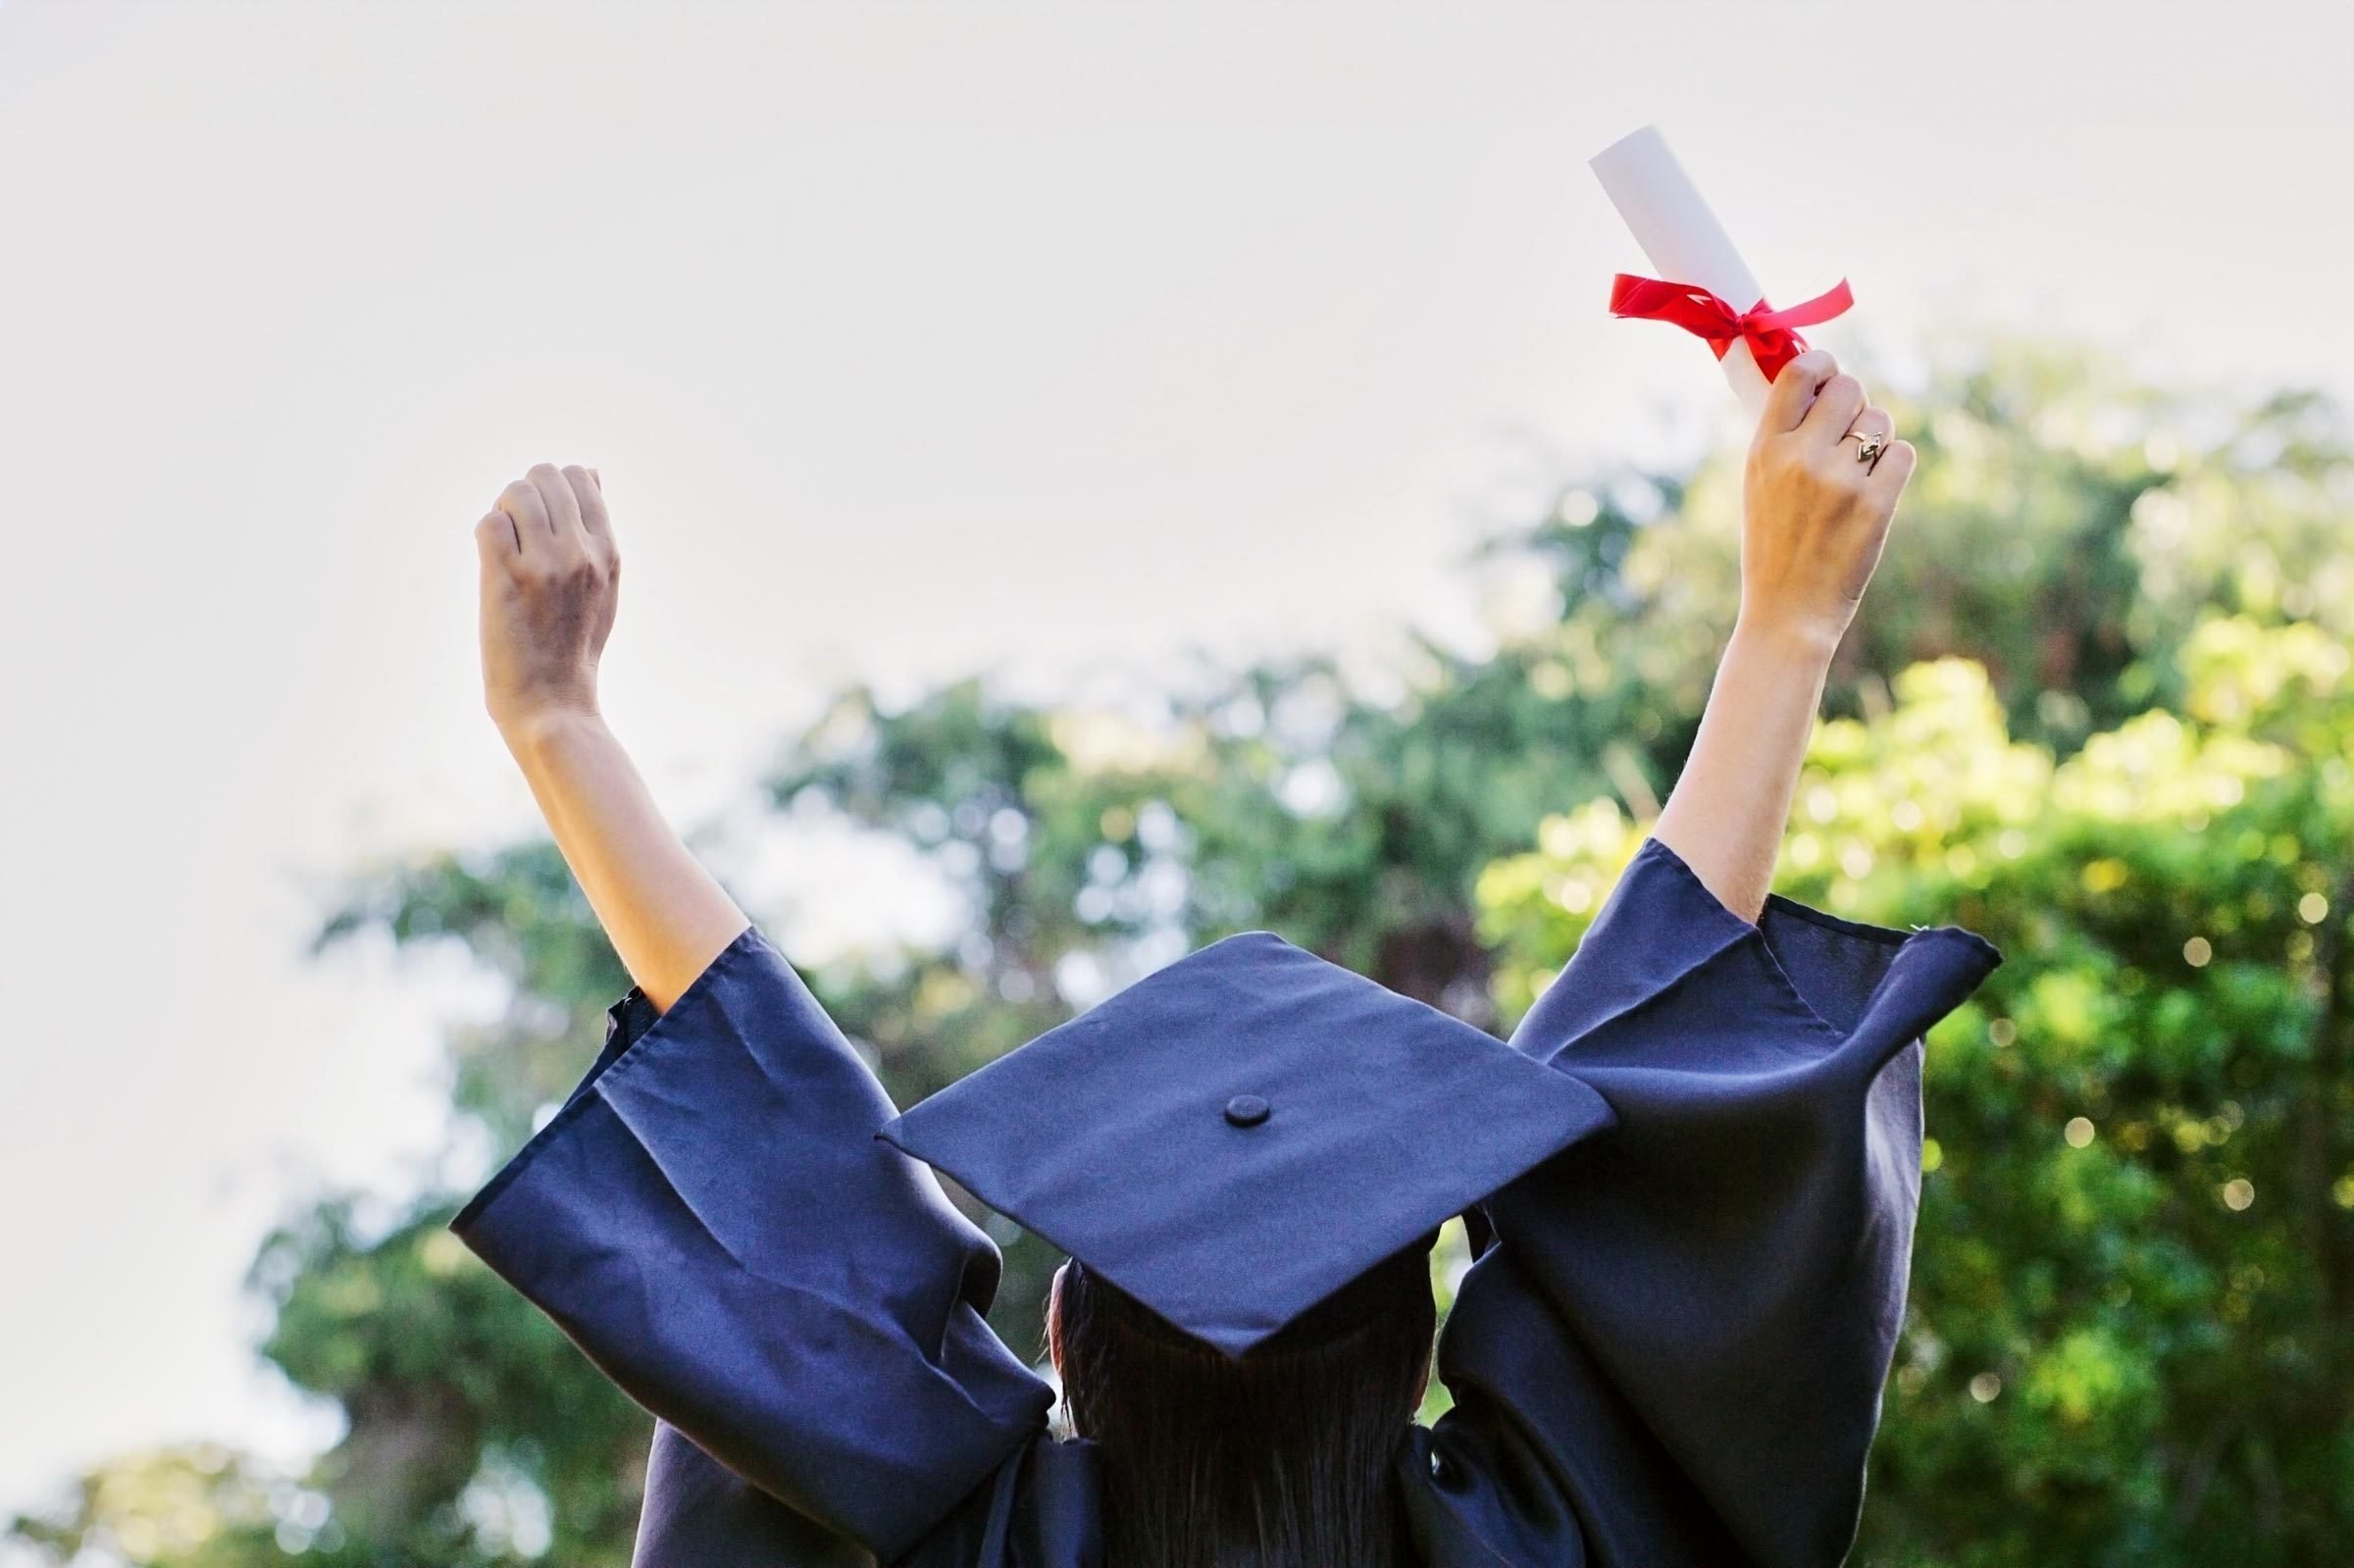 woman from behind wearing a cap and gown for graduation and holding up both arms with a rolled up degree in her right hand